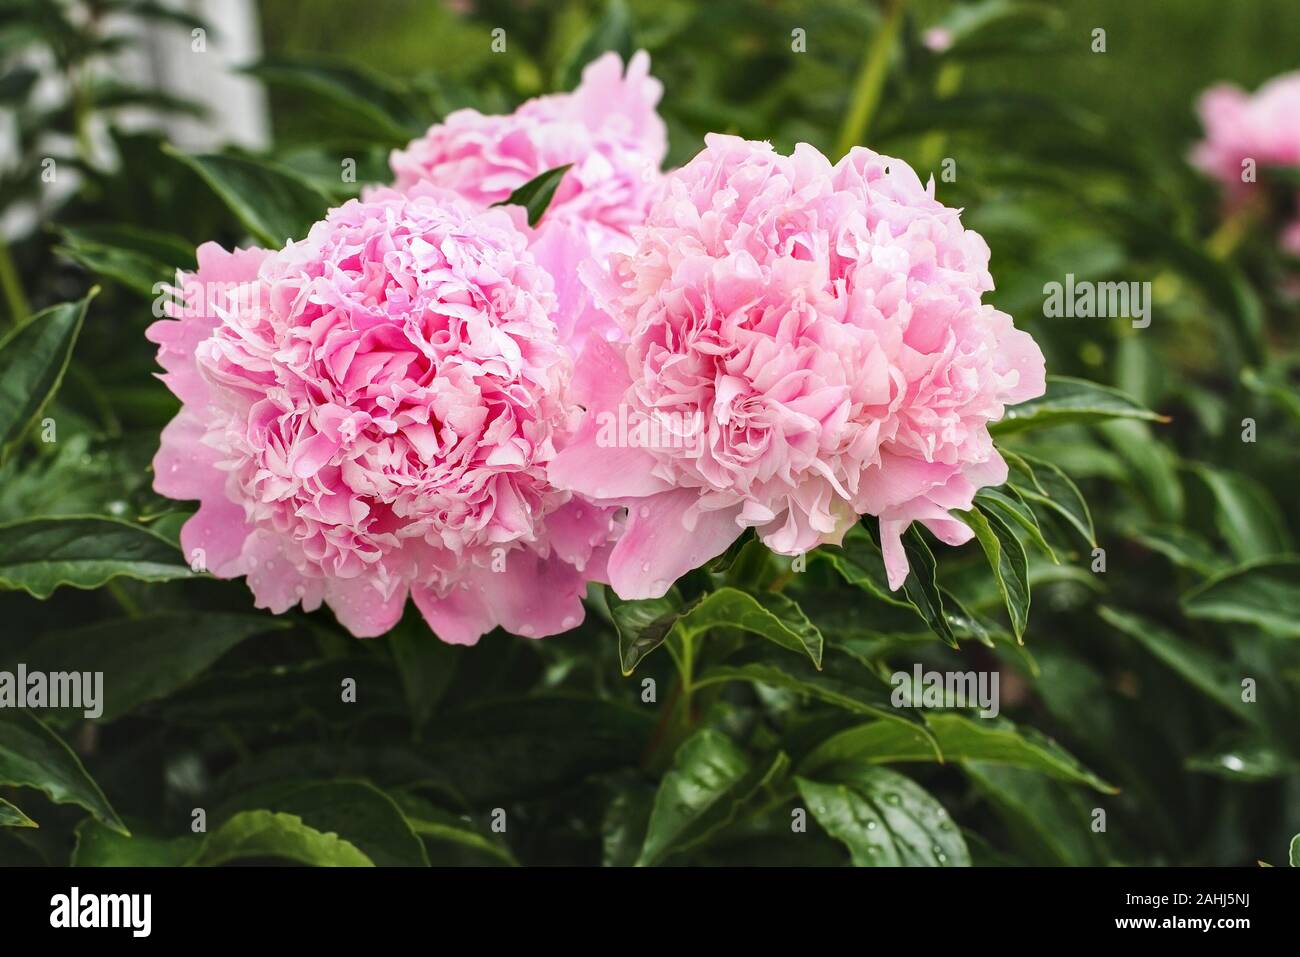 Cluster of three beautiful blooming pink Peony flowers in center of plants. Selective focus with blurred background. Stock Photo